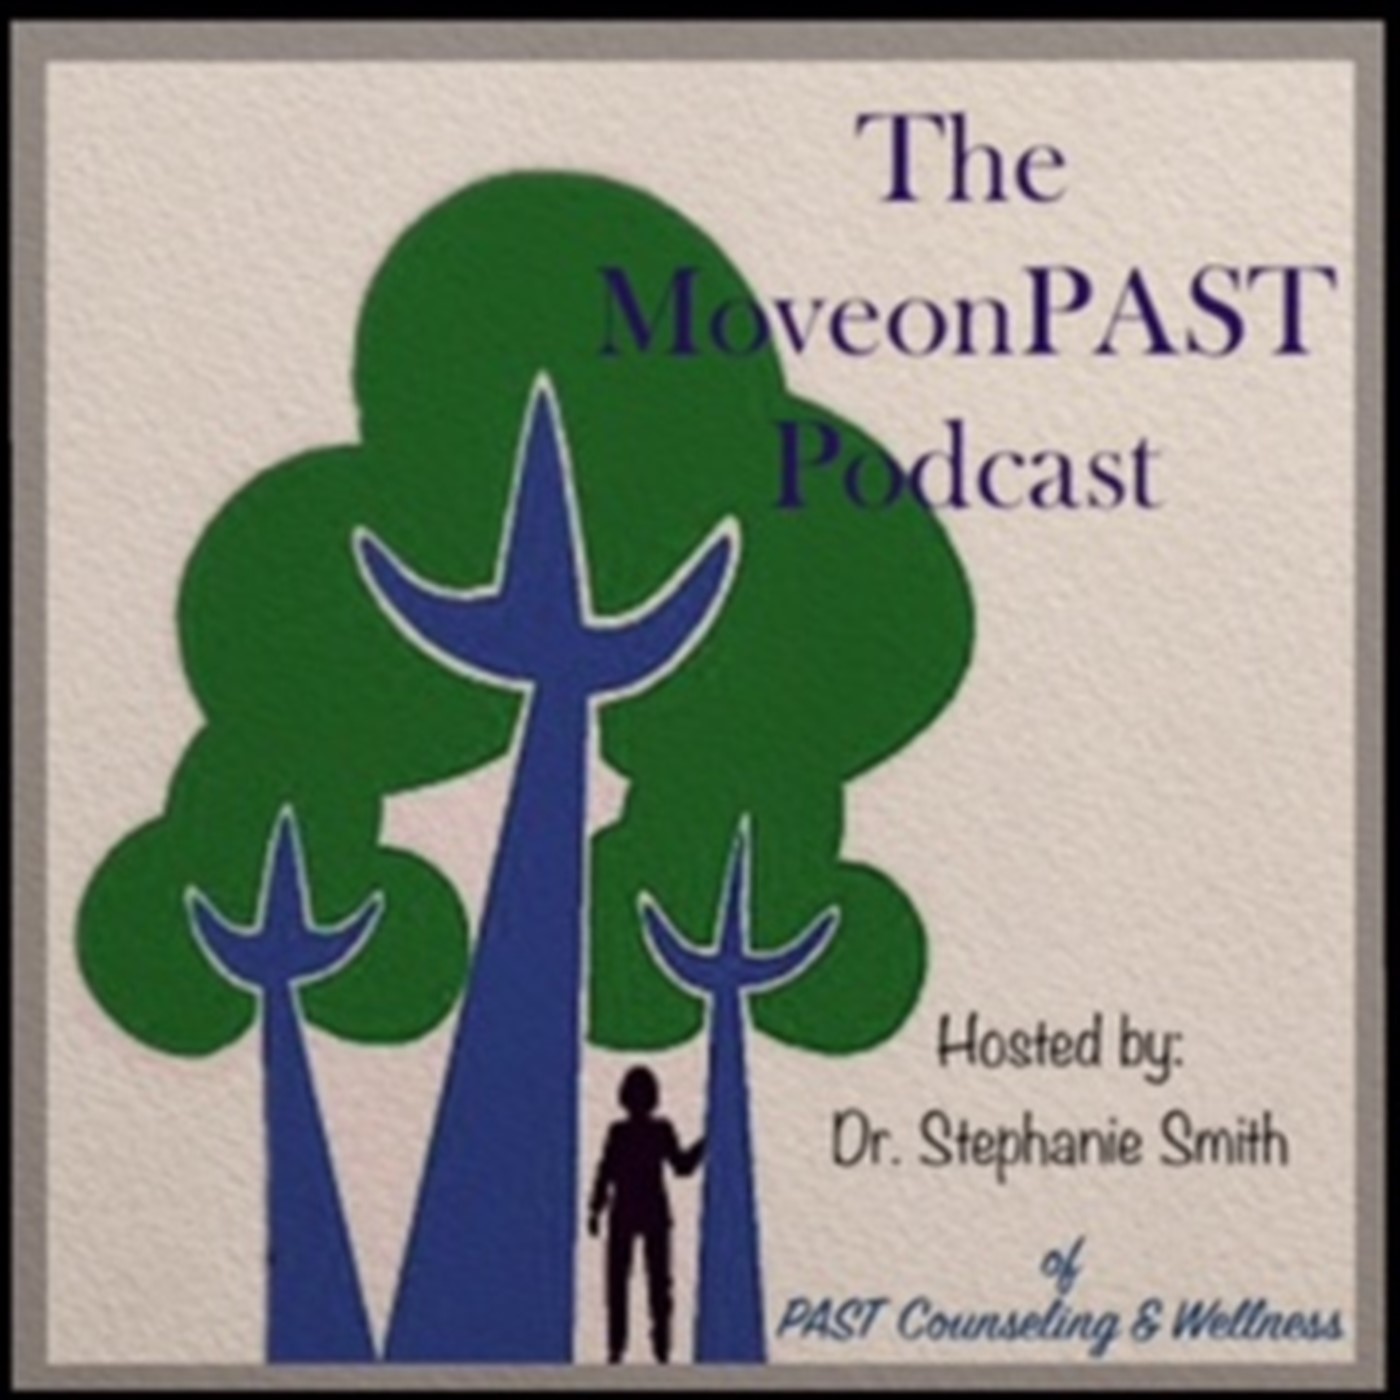 Gallery Photo of Check out the MoveonPAST Podcast hosted by Dr. Stephanie Smith of PAST Counseling & Wellness.  https://itunes.apple.com/us/podcast/moveonpast-podcast/